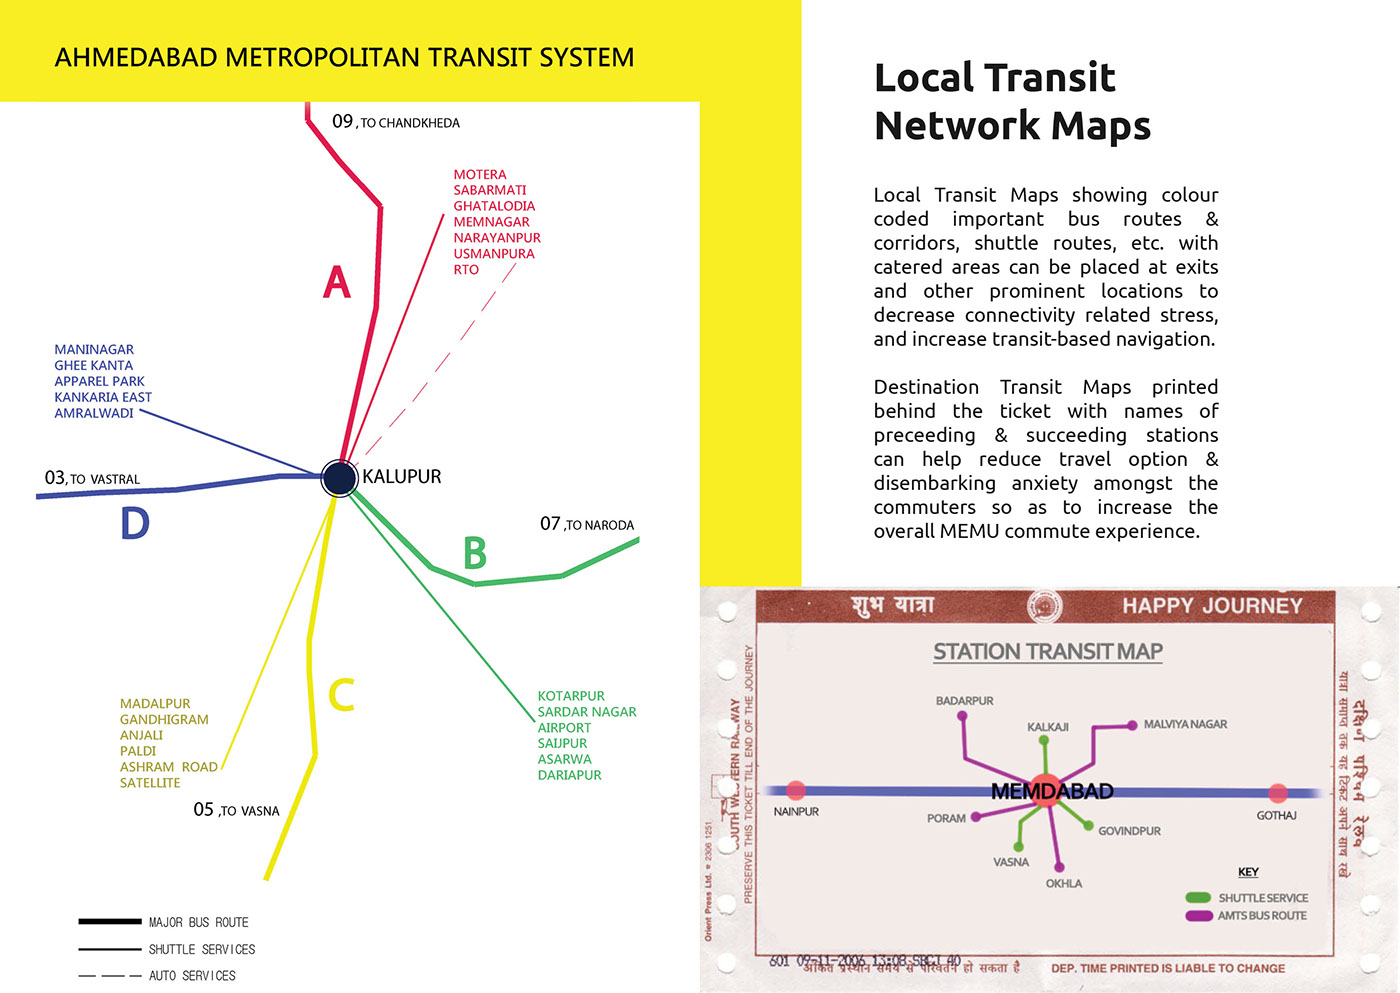 memu railway indian Experience system service Transit Mapping seamless Travel wayfinding ticket journey lastmile connectivity